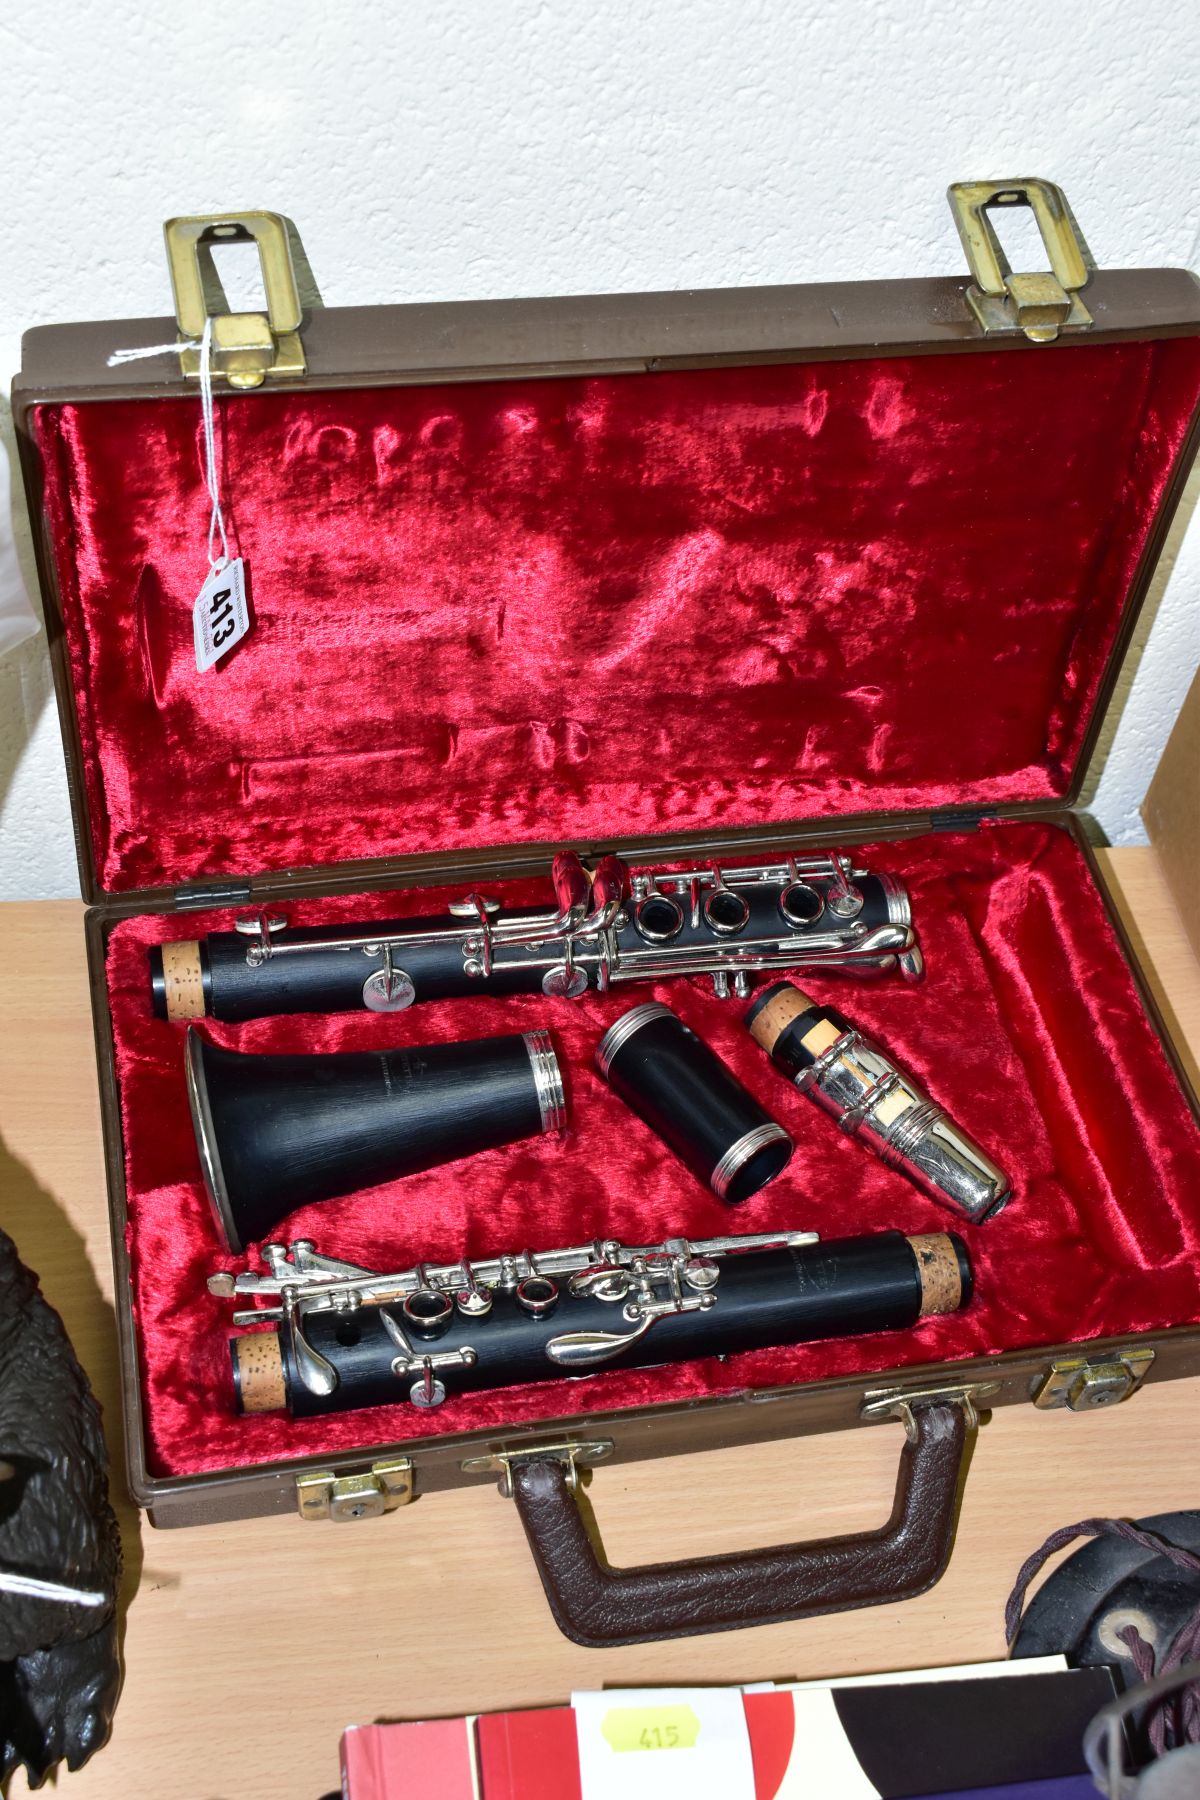 A CASED BUFFET CRAMPON EVETTE EBONITE CLARINET, serial number 177079, (missing reeds in case) ( - Image 2 of 5